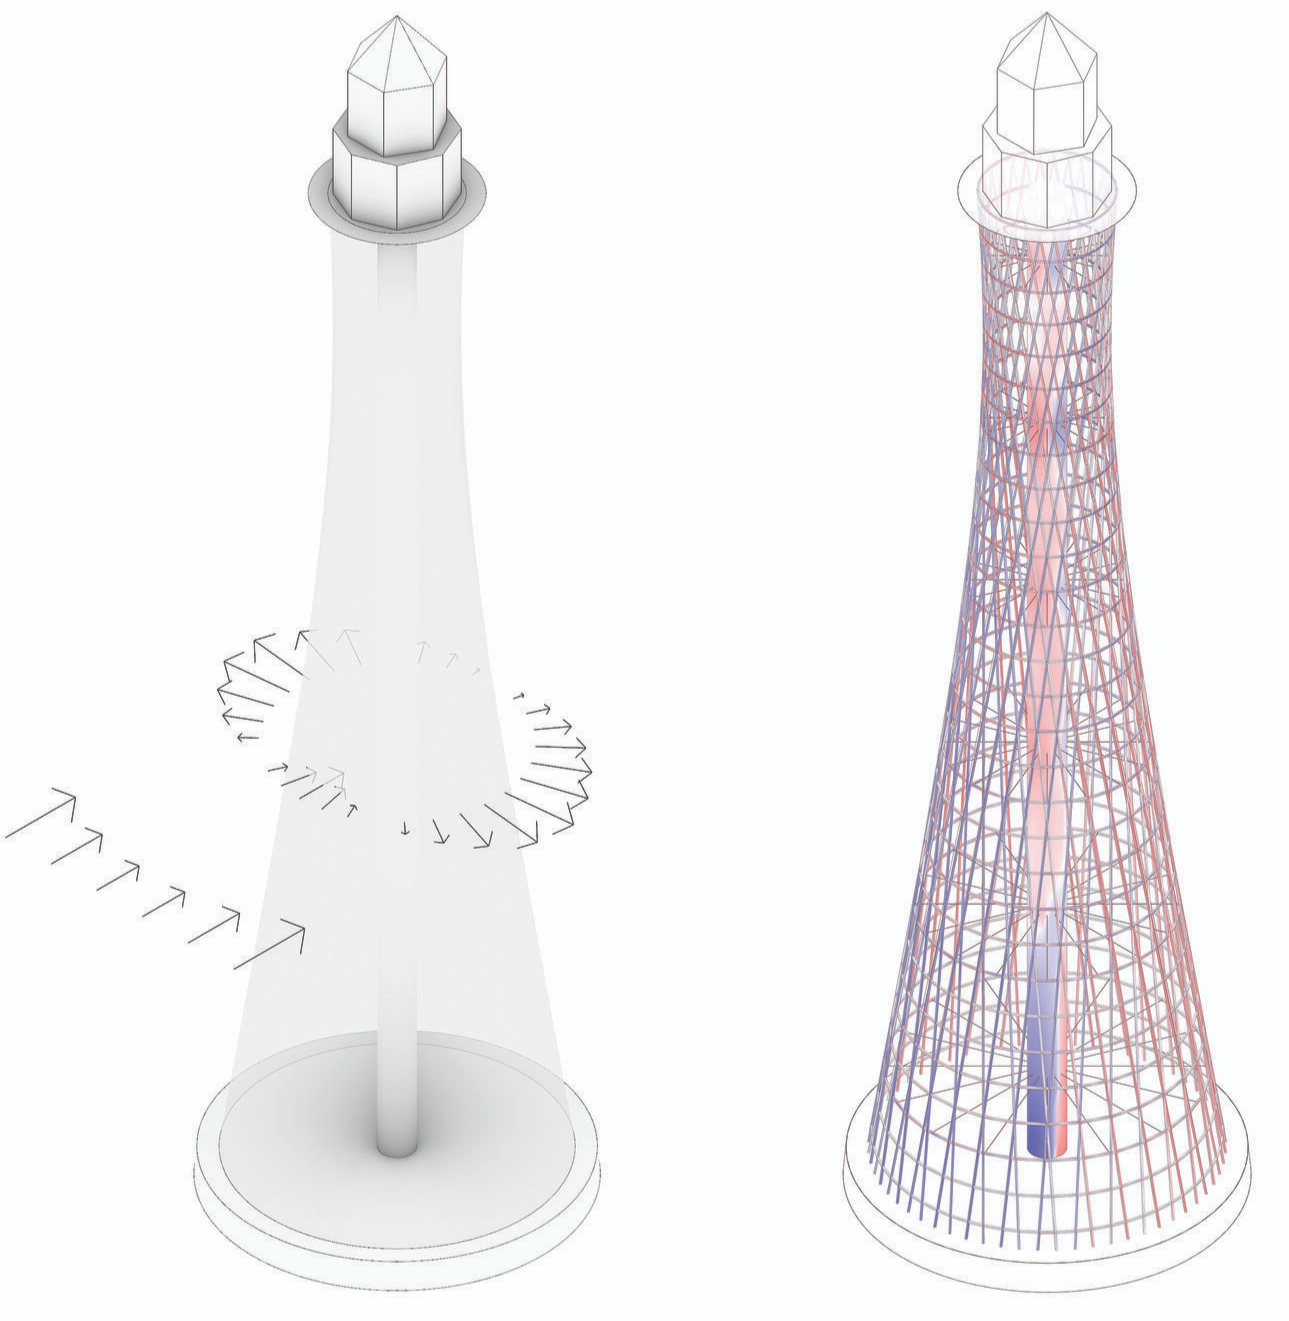 structural analysis of hyperbolic mesh shell of the lighthouse under the wind load